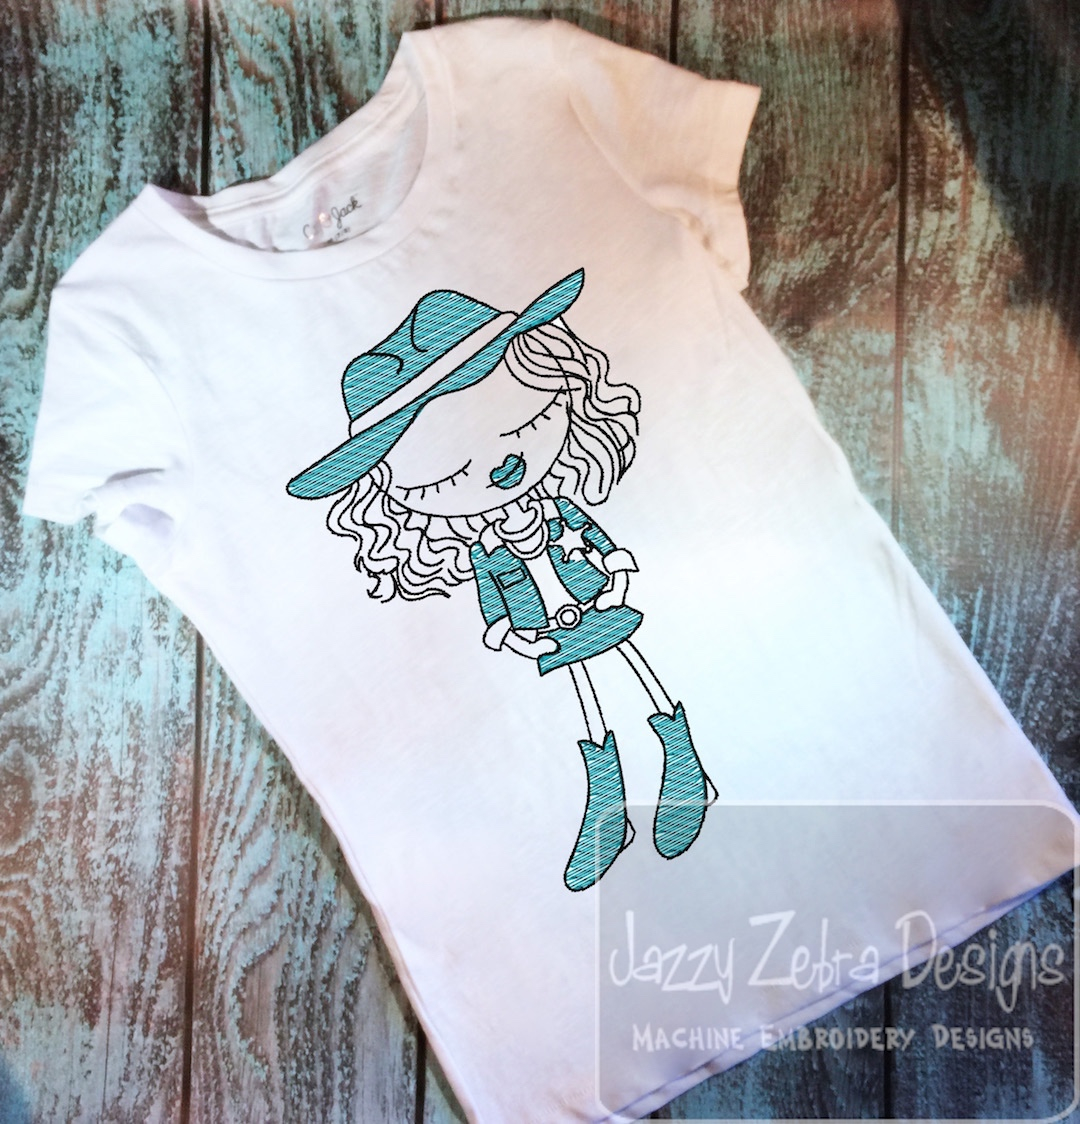 Western Embroidery Patterns Swirly Girl Cowgirl 2 Sketch Embroidery Design Cowgirl Embroidery Design Girl Embroidery Design Sketch Embroidery Design Western Embroidery